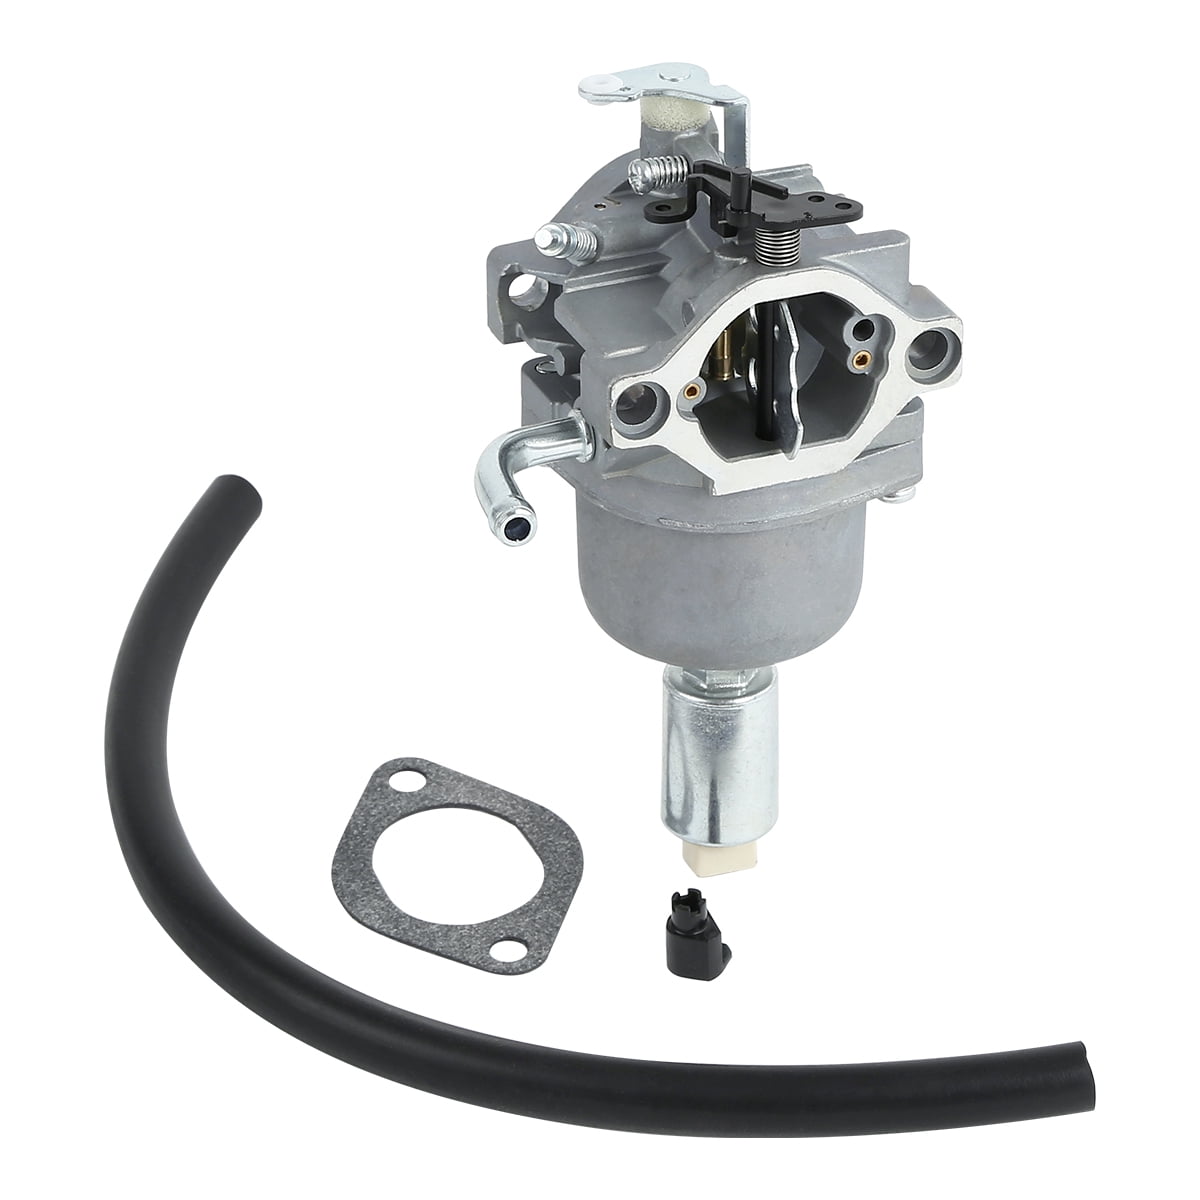 Details about   NEW Carburetor For Briggs & Stratton Intek 796109 591731 594593 with Air Filter 